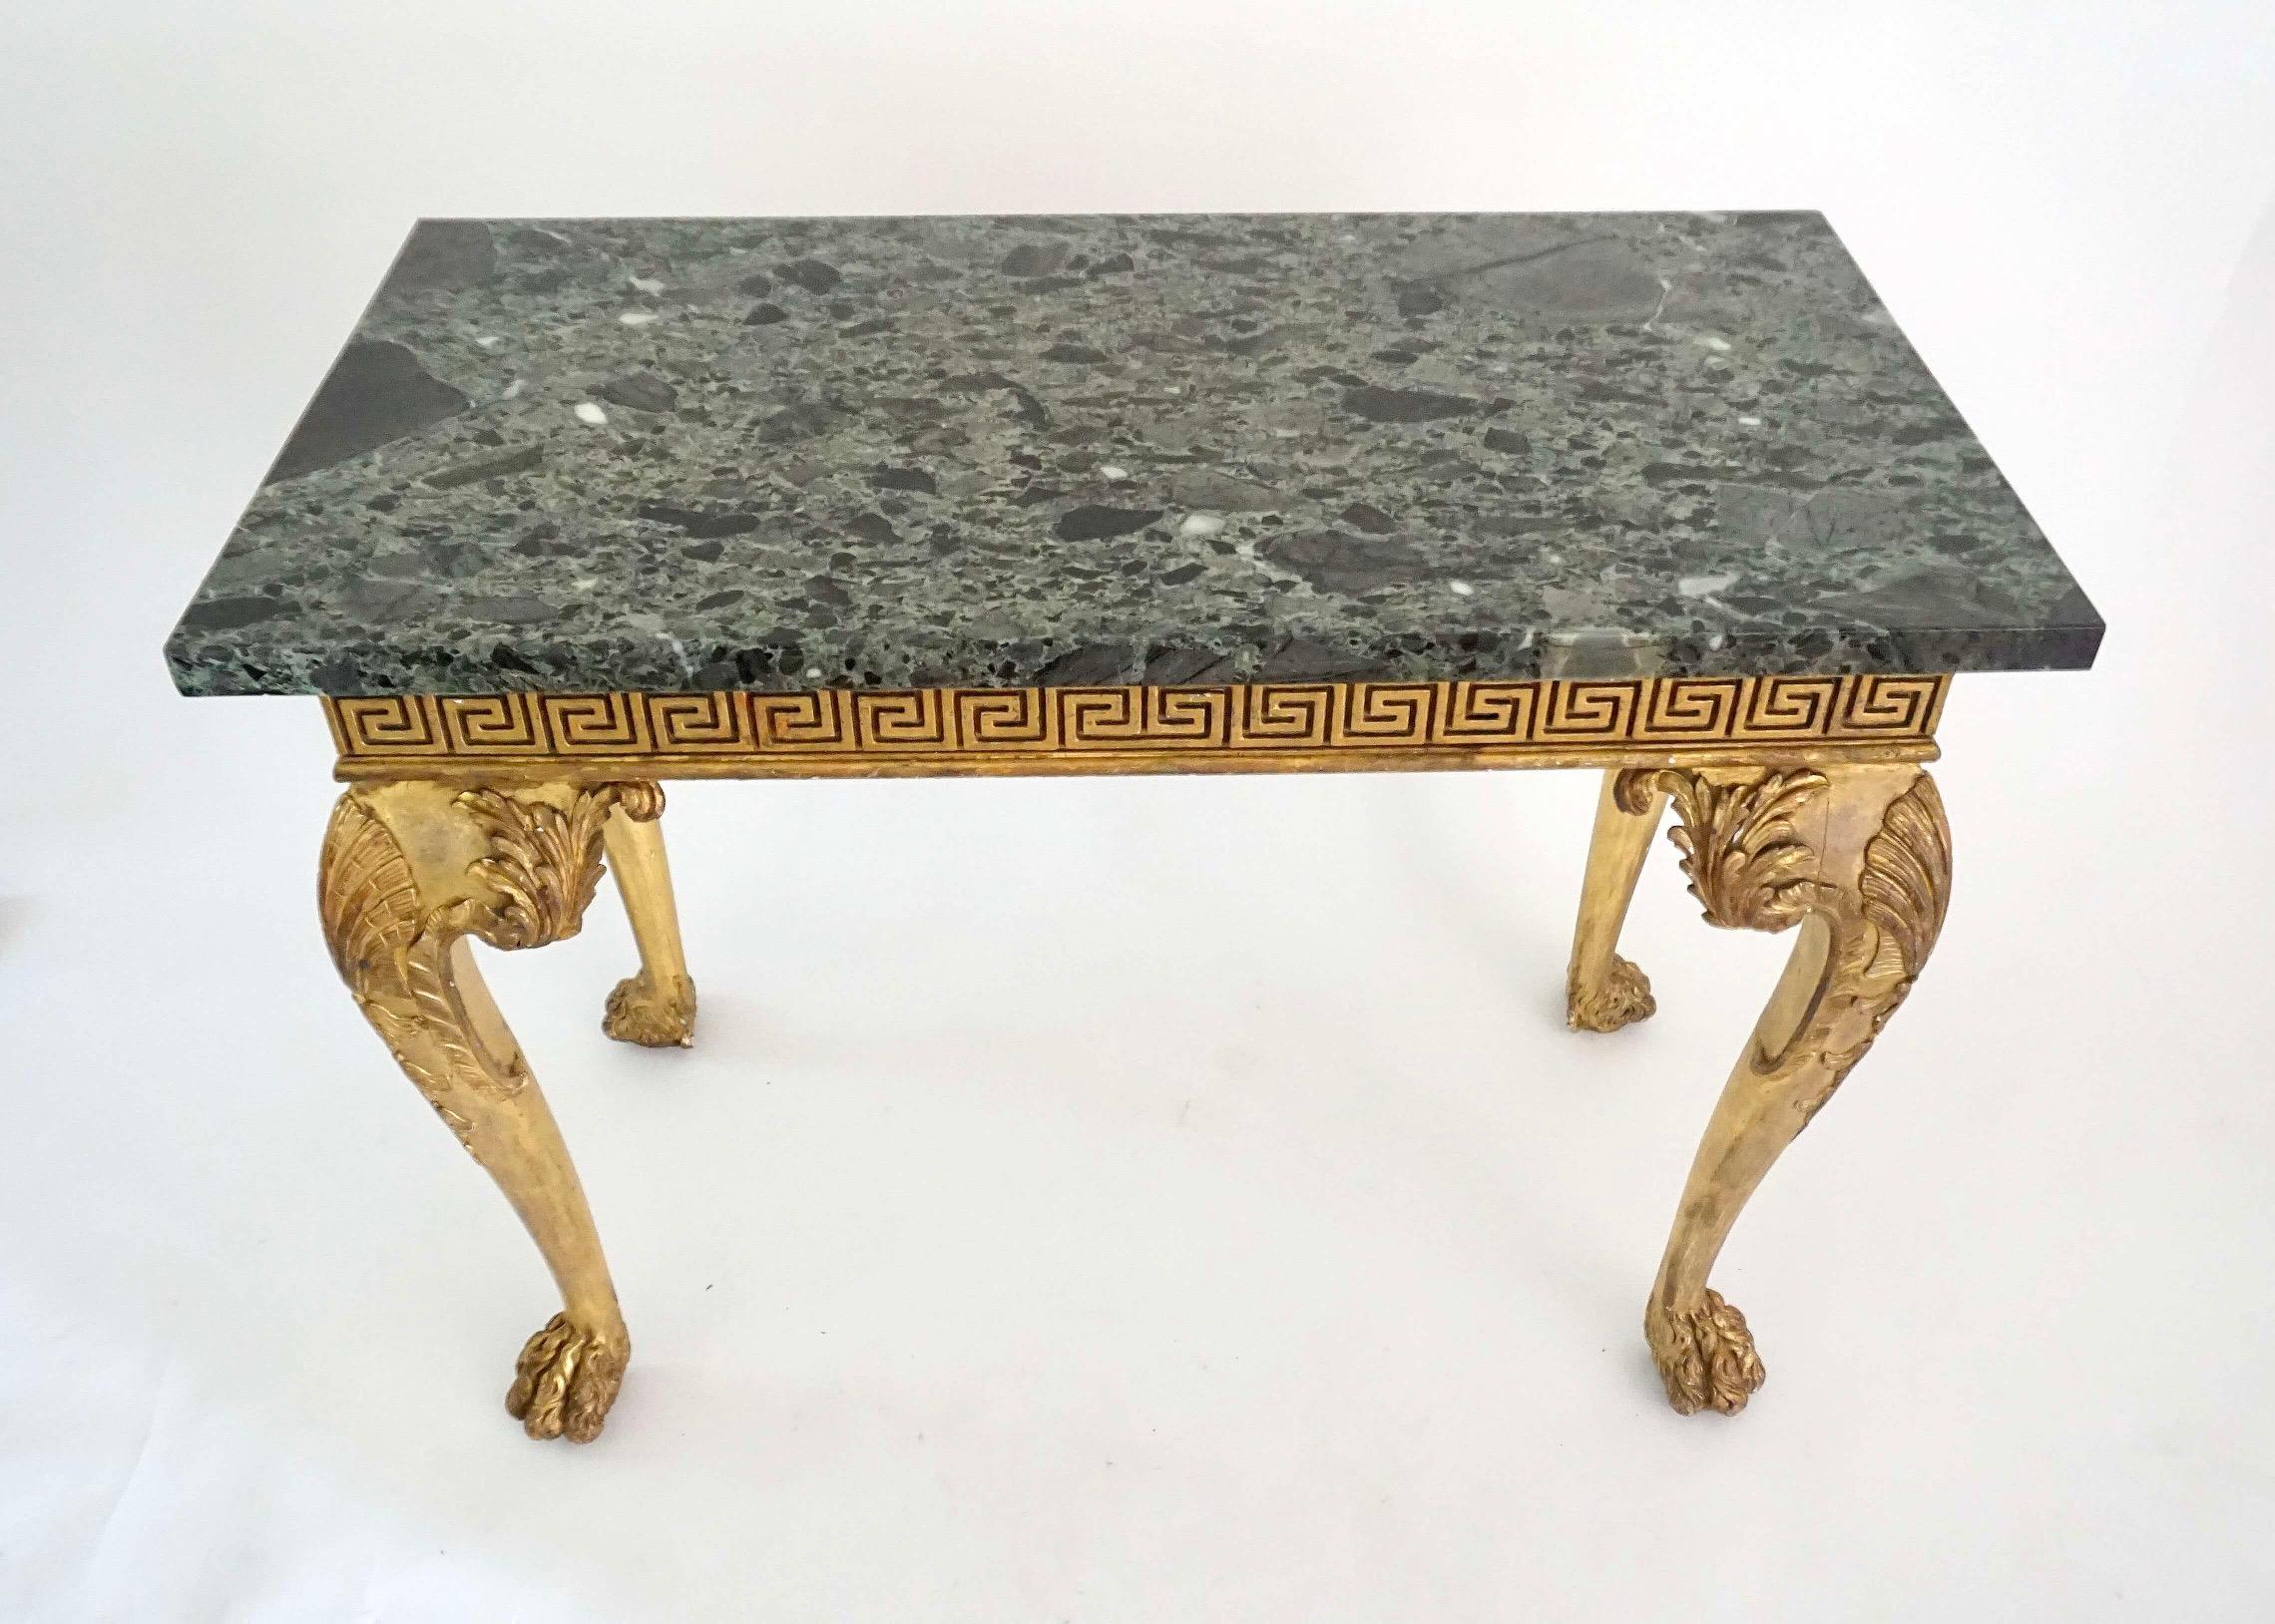 Anglo-Irish Regency Giltwood Side Tables, Manner of William Kent, circa 1815 For Sale 3